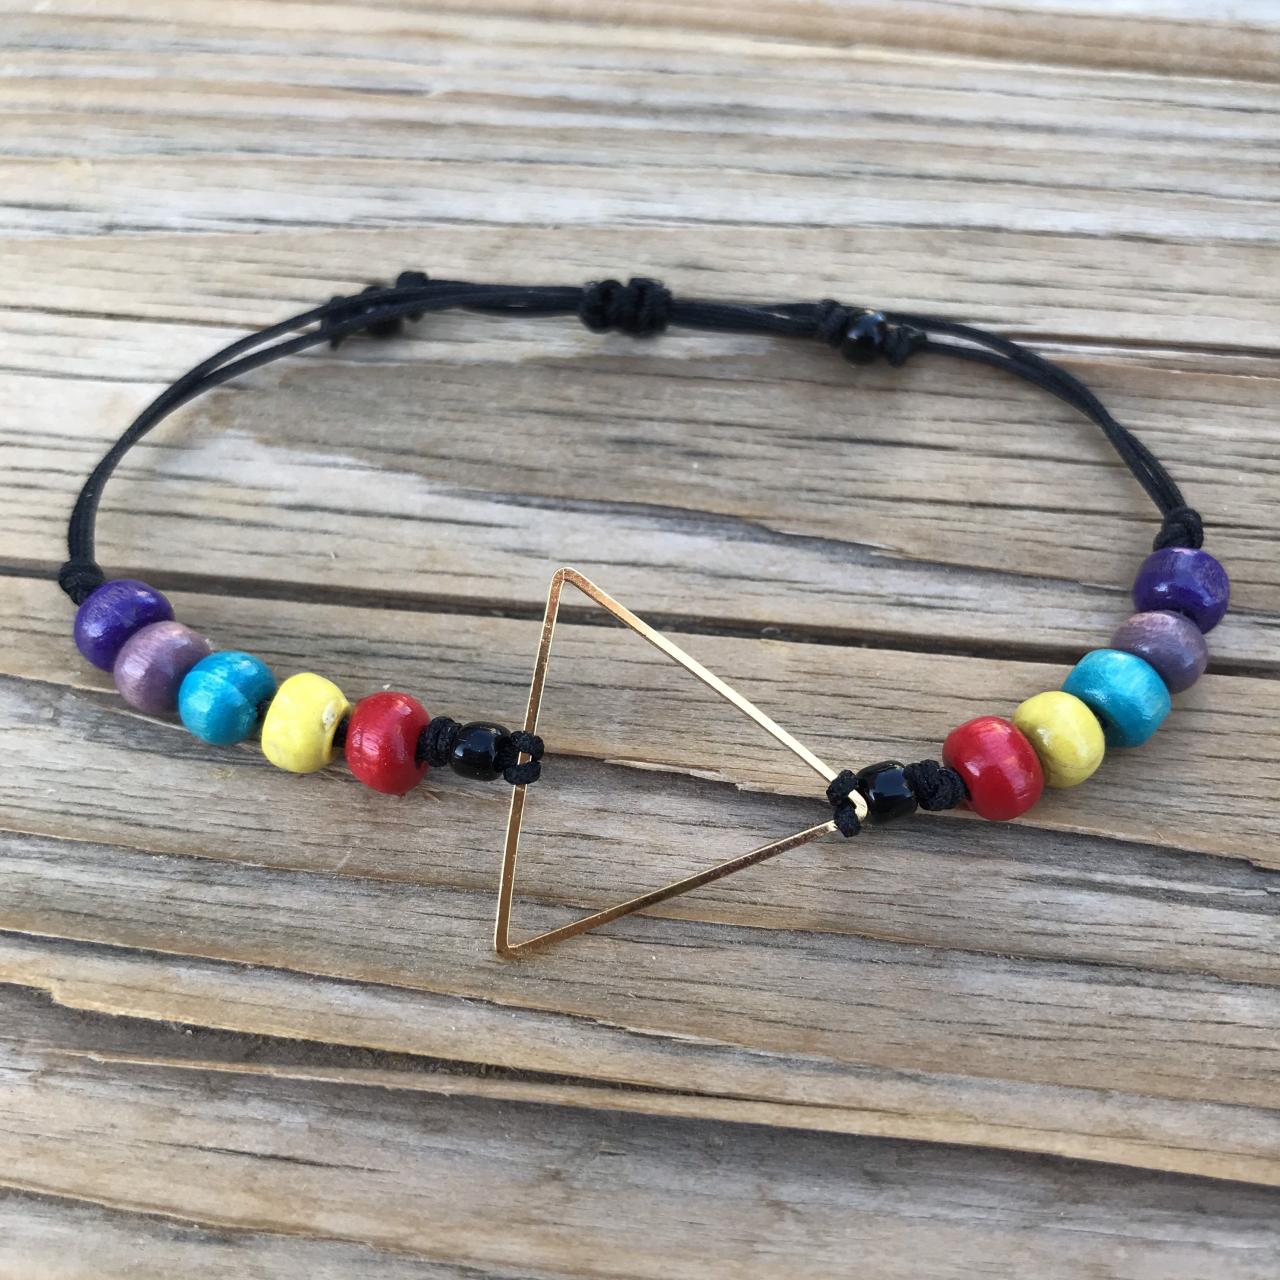 Classic Pride WOOD Beaded Rainbow With Golden Brass Triangle, Bracelet or Anklet With Black Adjustable Cord